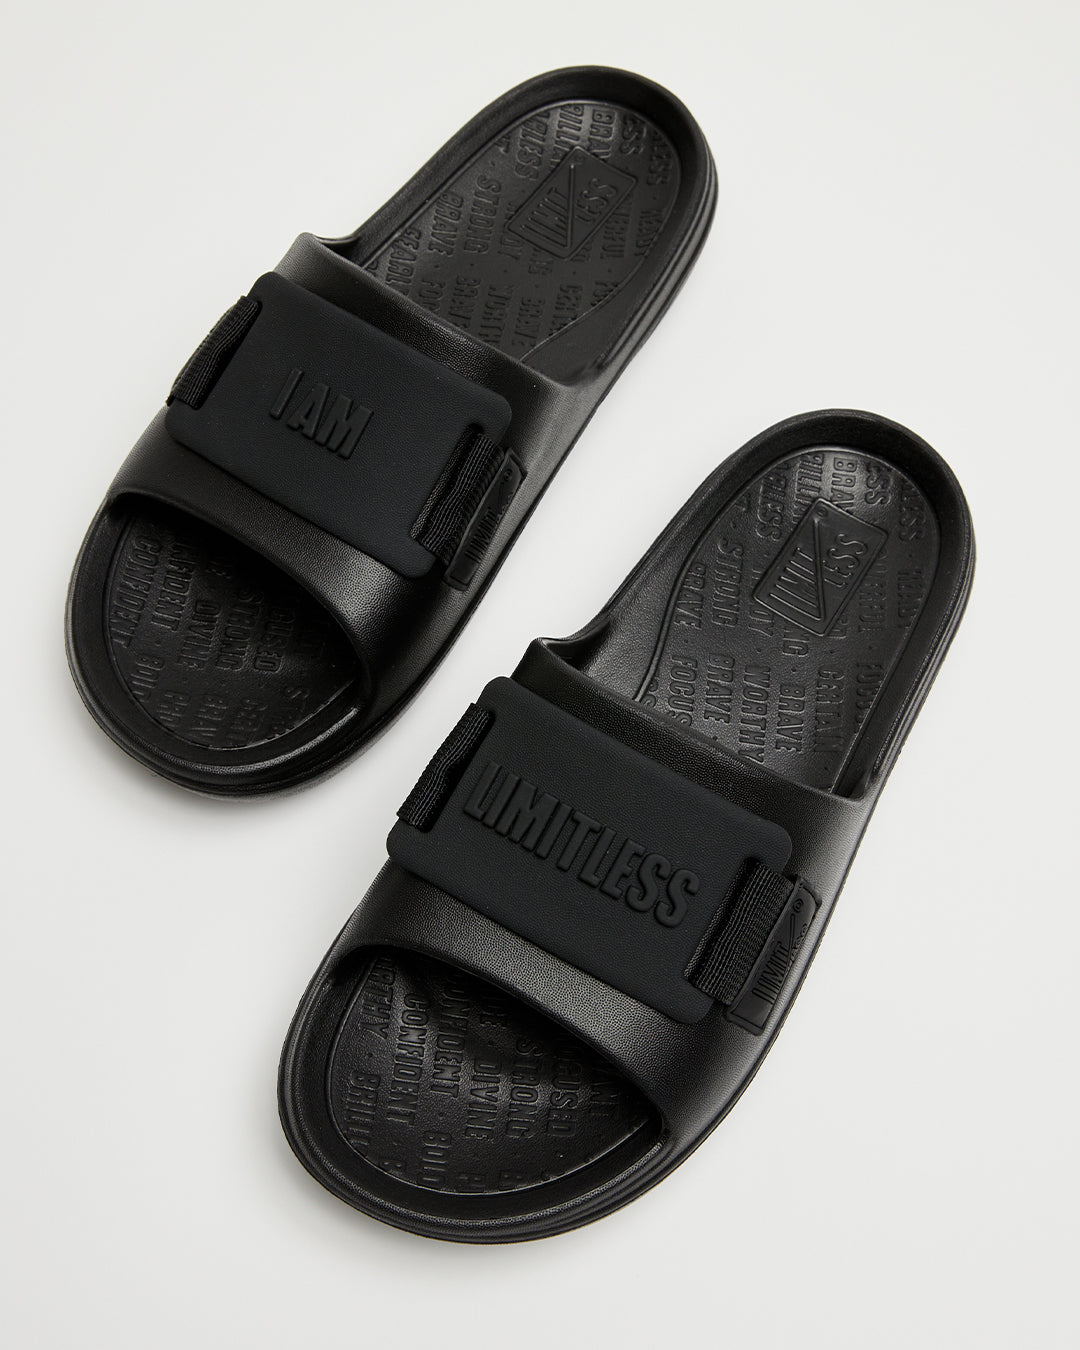 LIMITLESS SLIDES™ WITH ESSENTIAL TIBAH™ QUAD - BOUNTIFUL HIGH SCHOOL EDITION